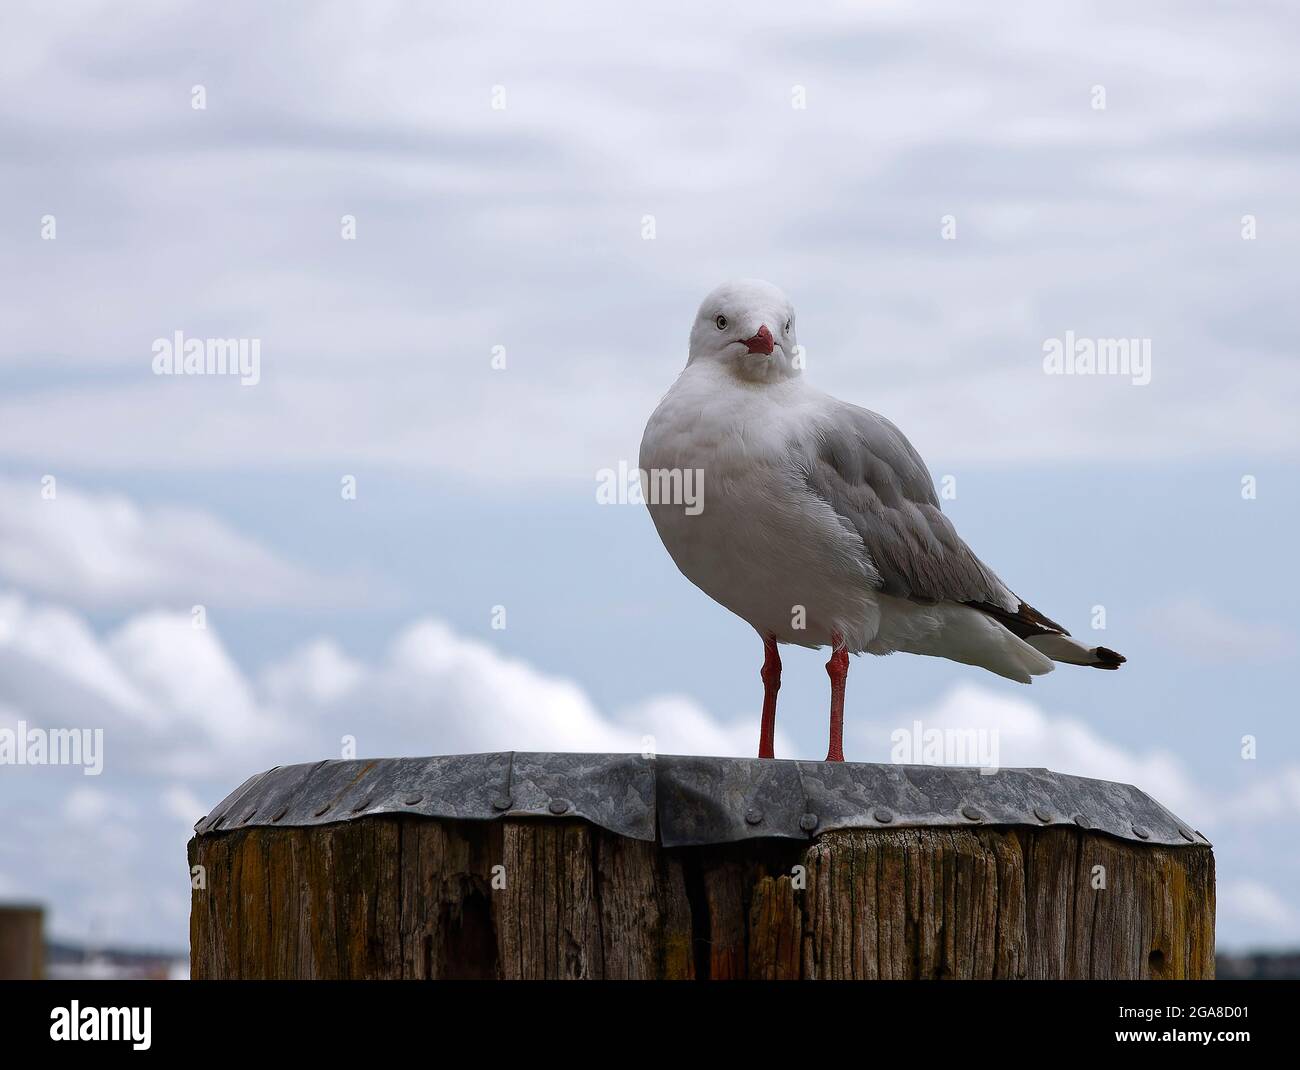 Red-billed gull, portrait, close-up, front view, standing on piling, shore bird, Larus novaehollandiae, silver gull, animal, wildlife, nature, Aucklan Stock Photo